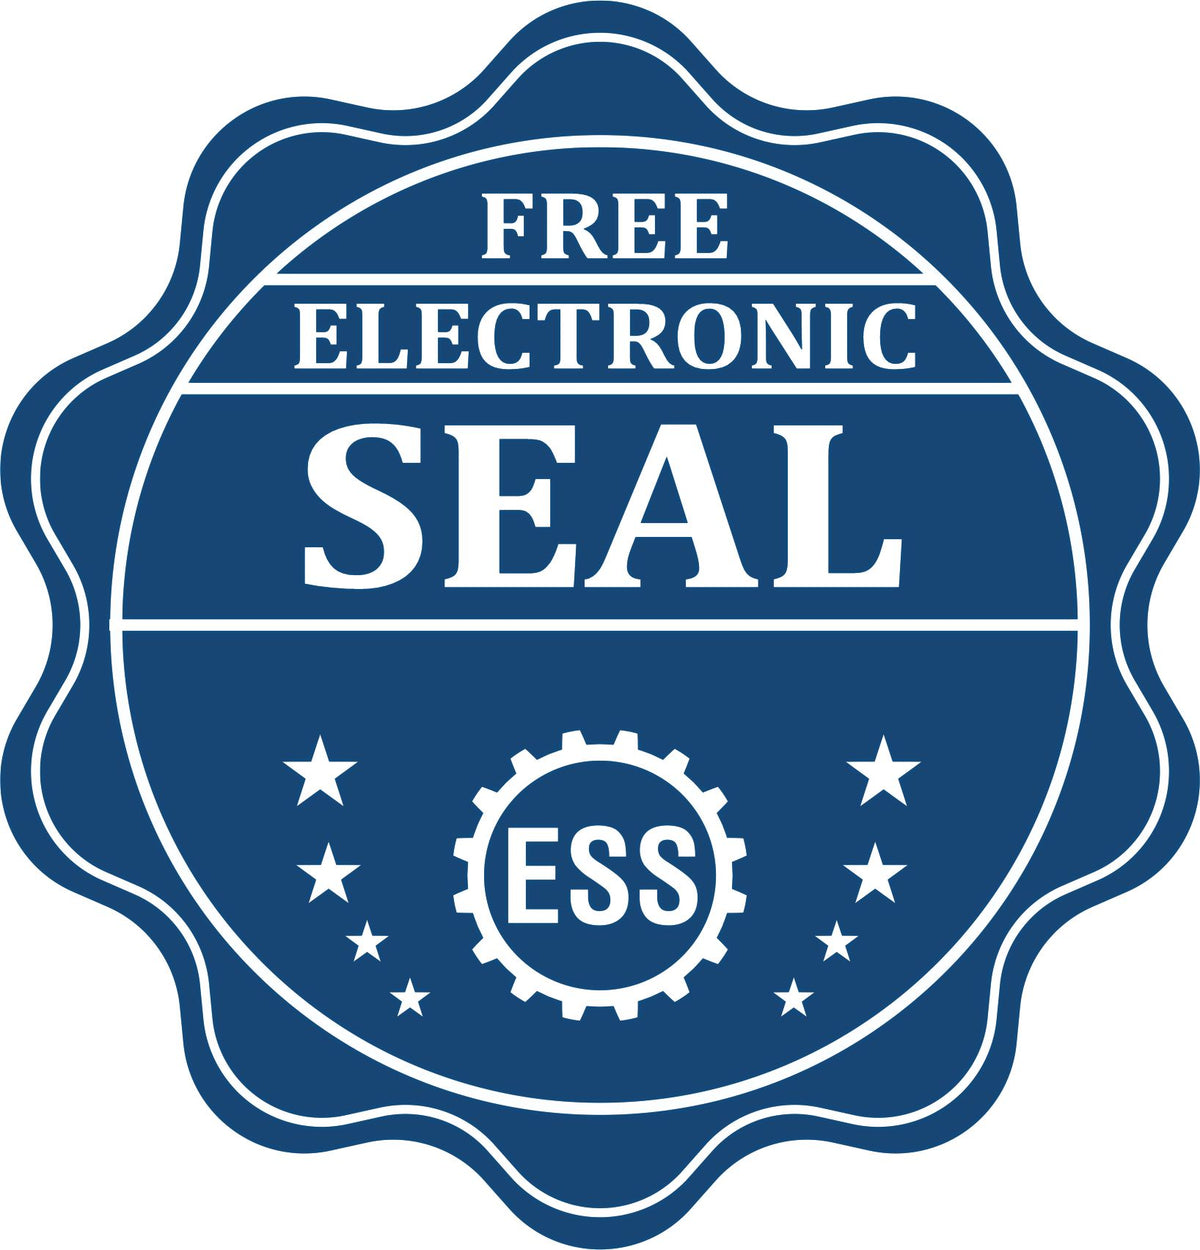 A badge showing a free electronic seal for the Hybrid Colorado Geologist Seal with stars and the ESS gear on the emblem.